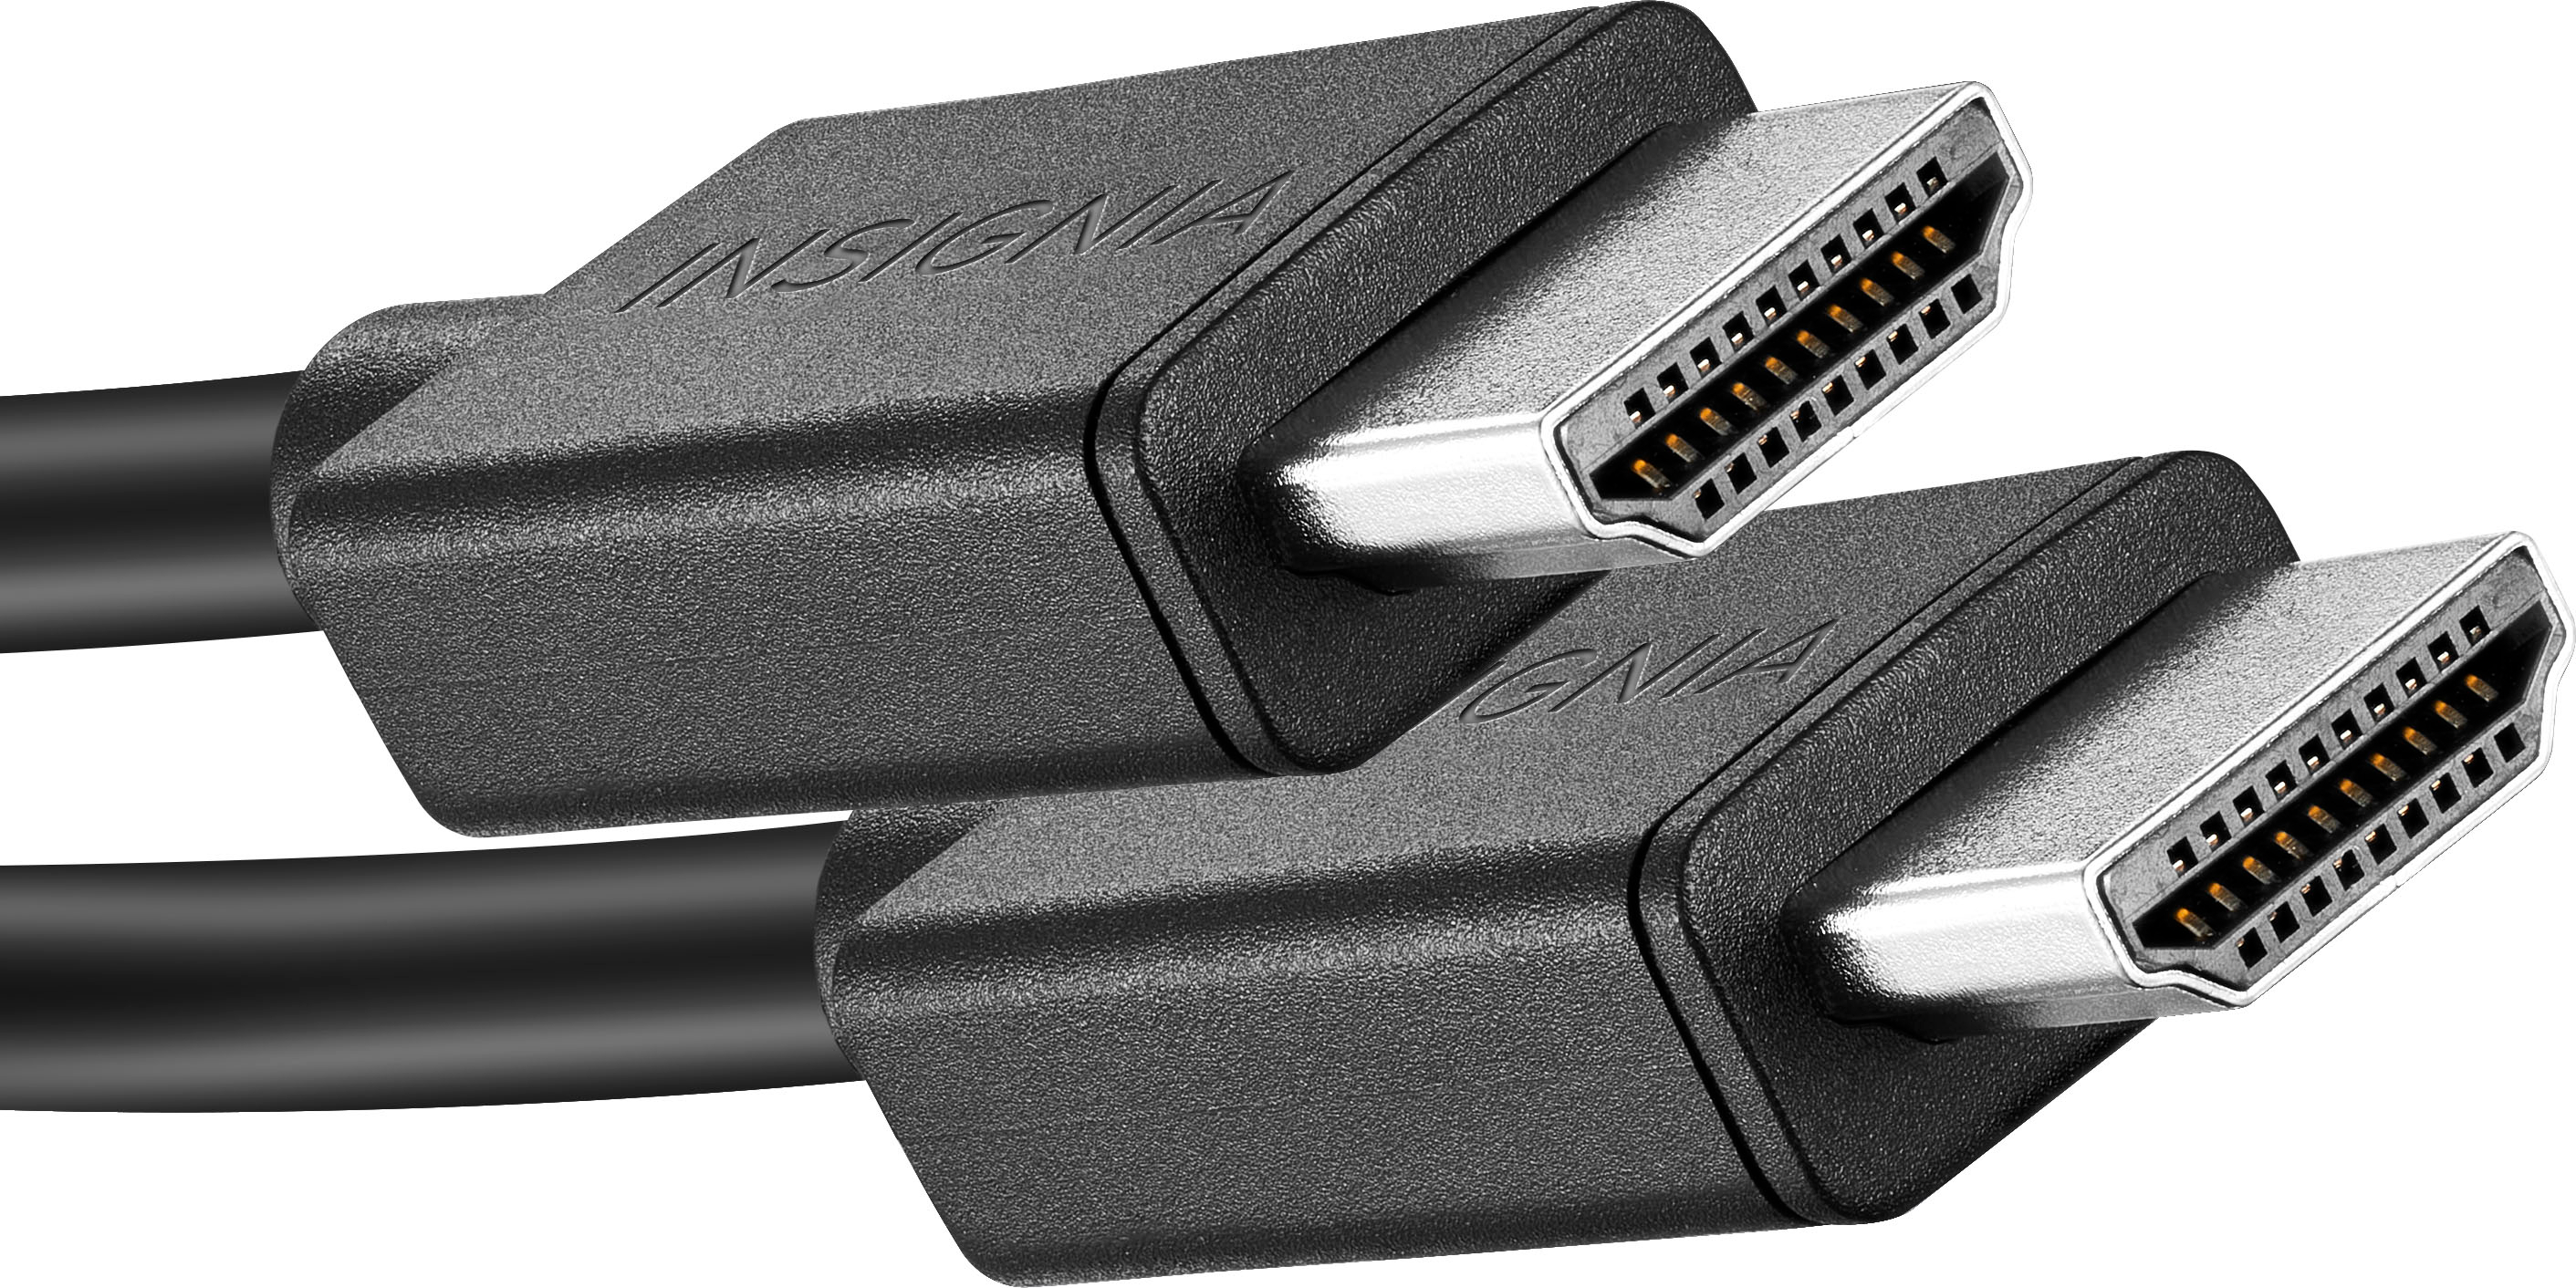 Insignia™ 4' High-Speed HDMI-to-Mini HDMI Cable Black NS-PG04502 - Best Buy